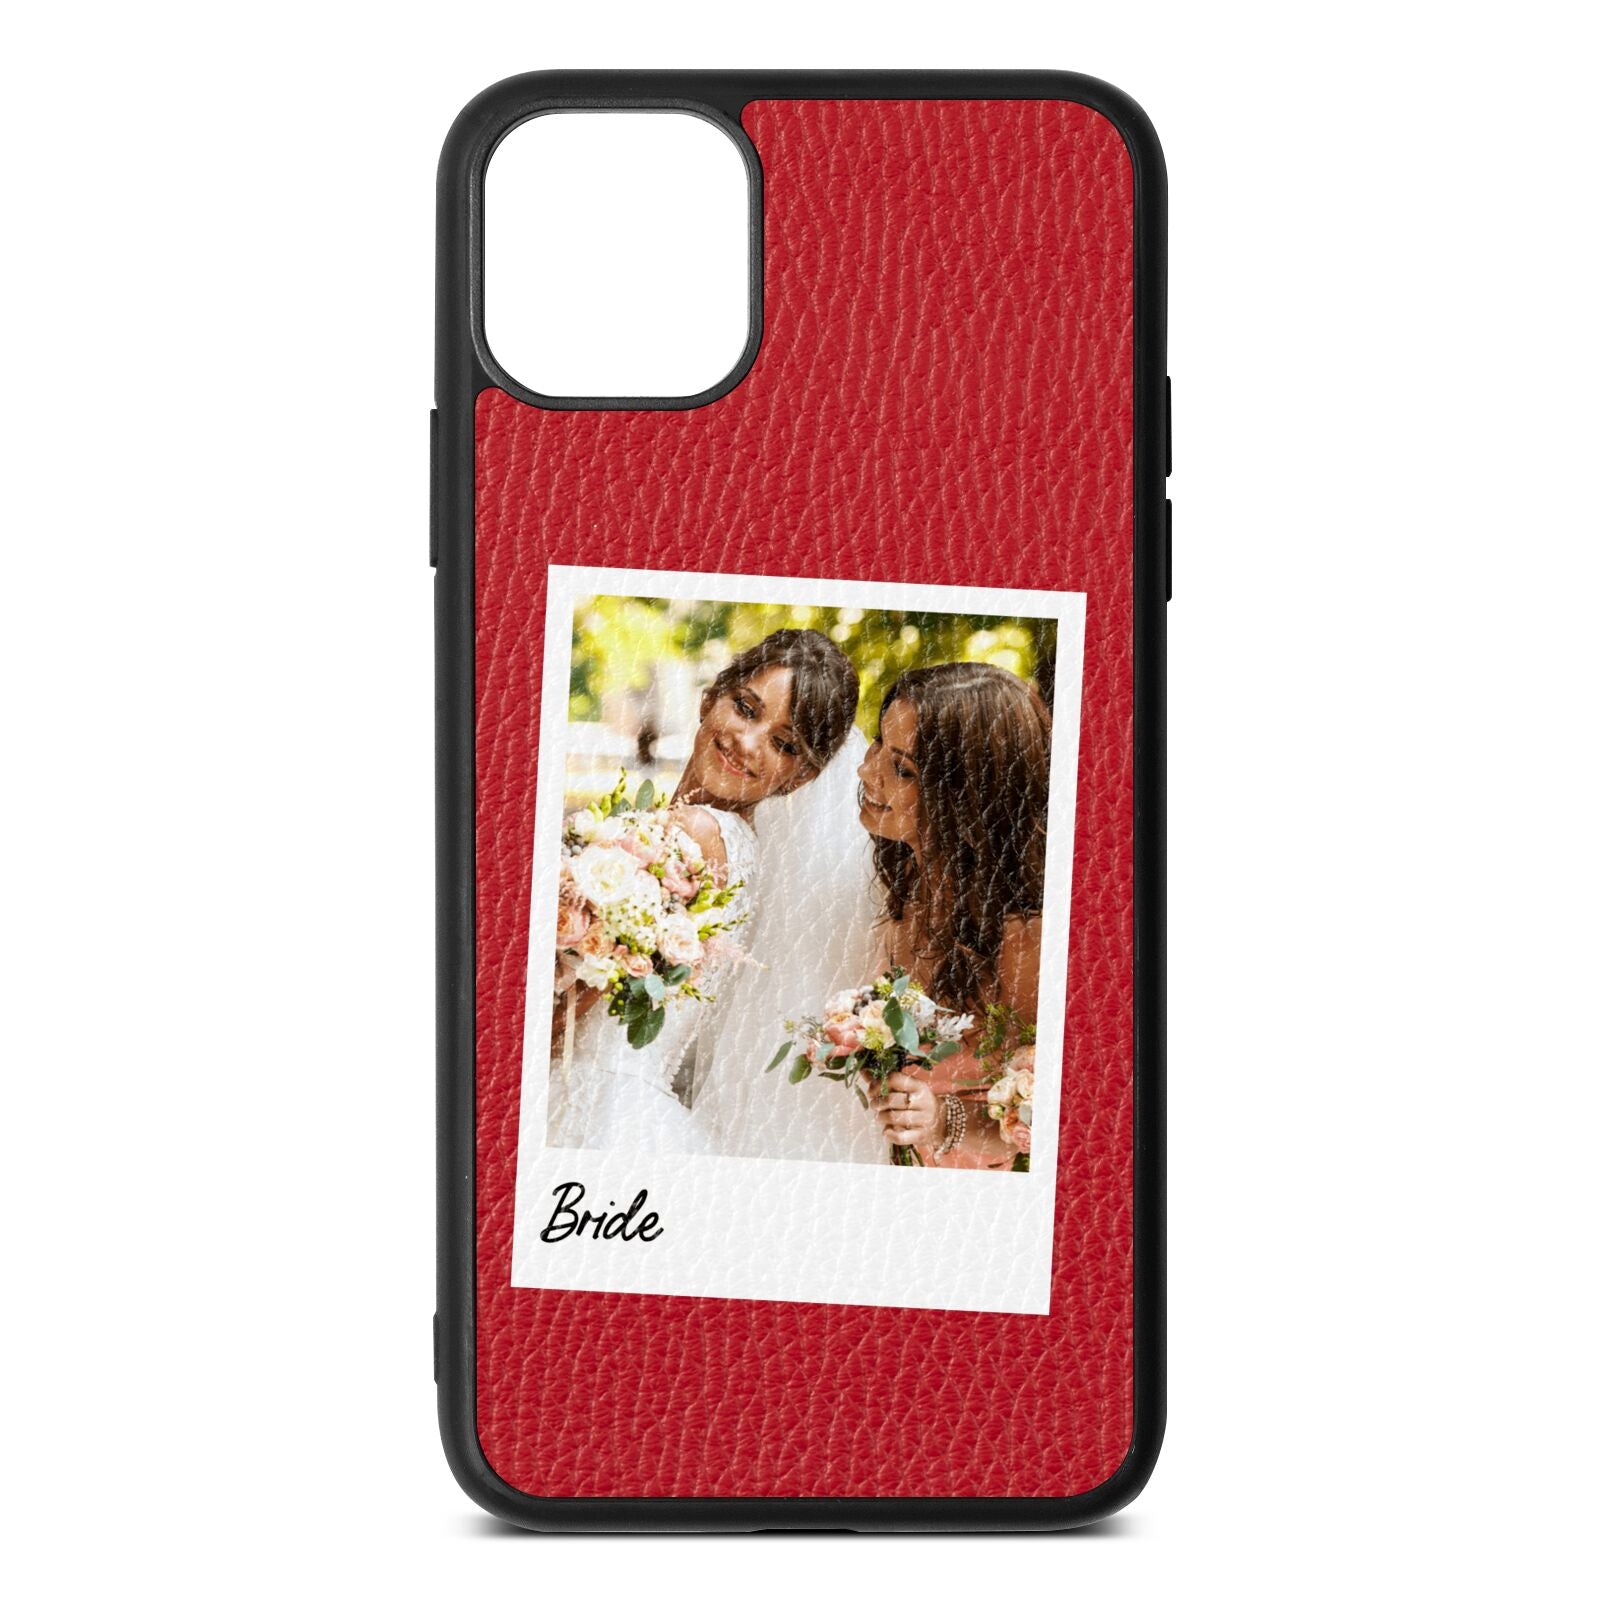 Bridal Photo Red Pebble Leather iPhone 11 Pro Max Case